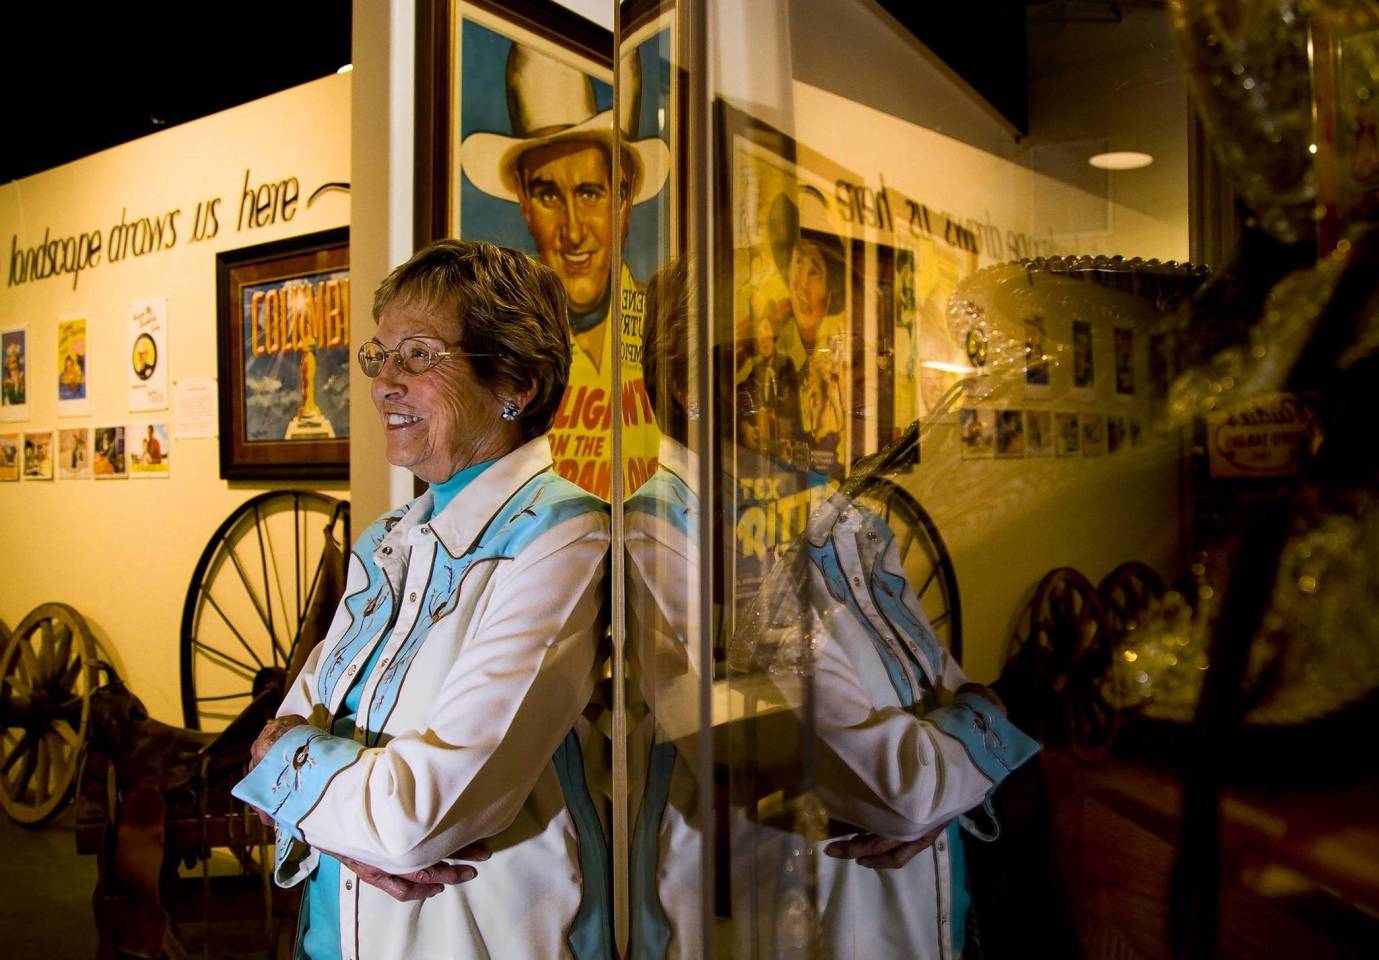 LA Times Photo of Western Film History Museum, Inyo County